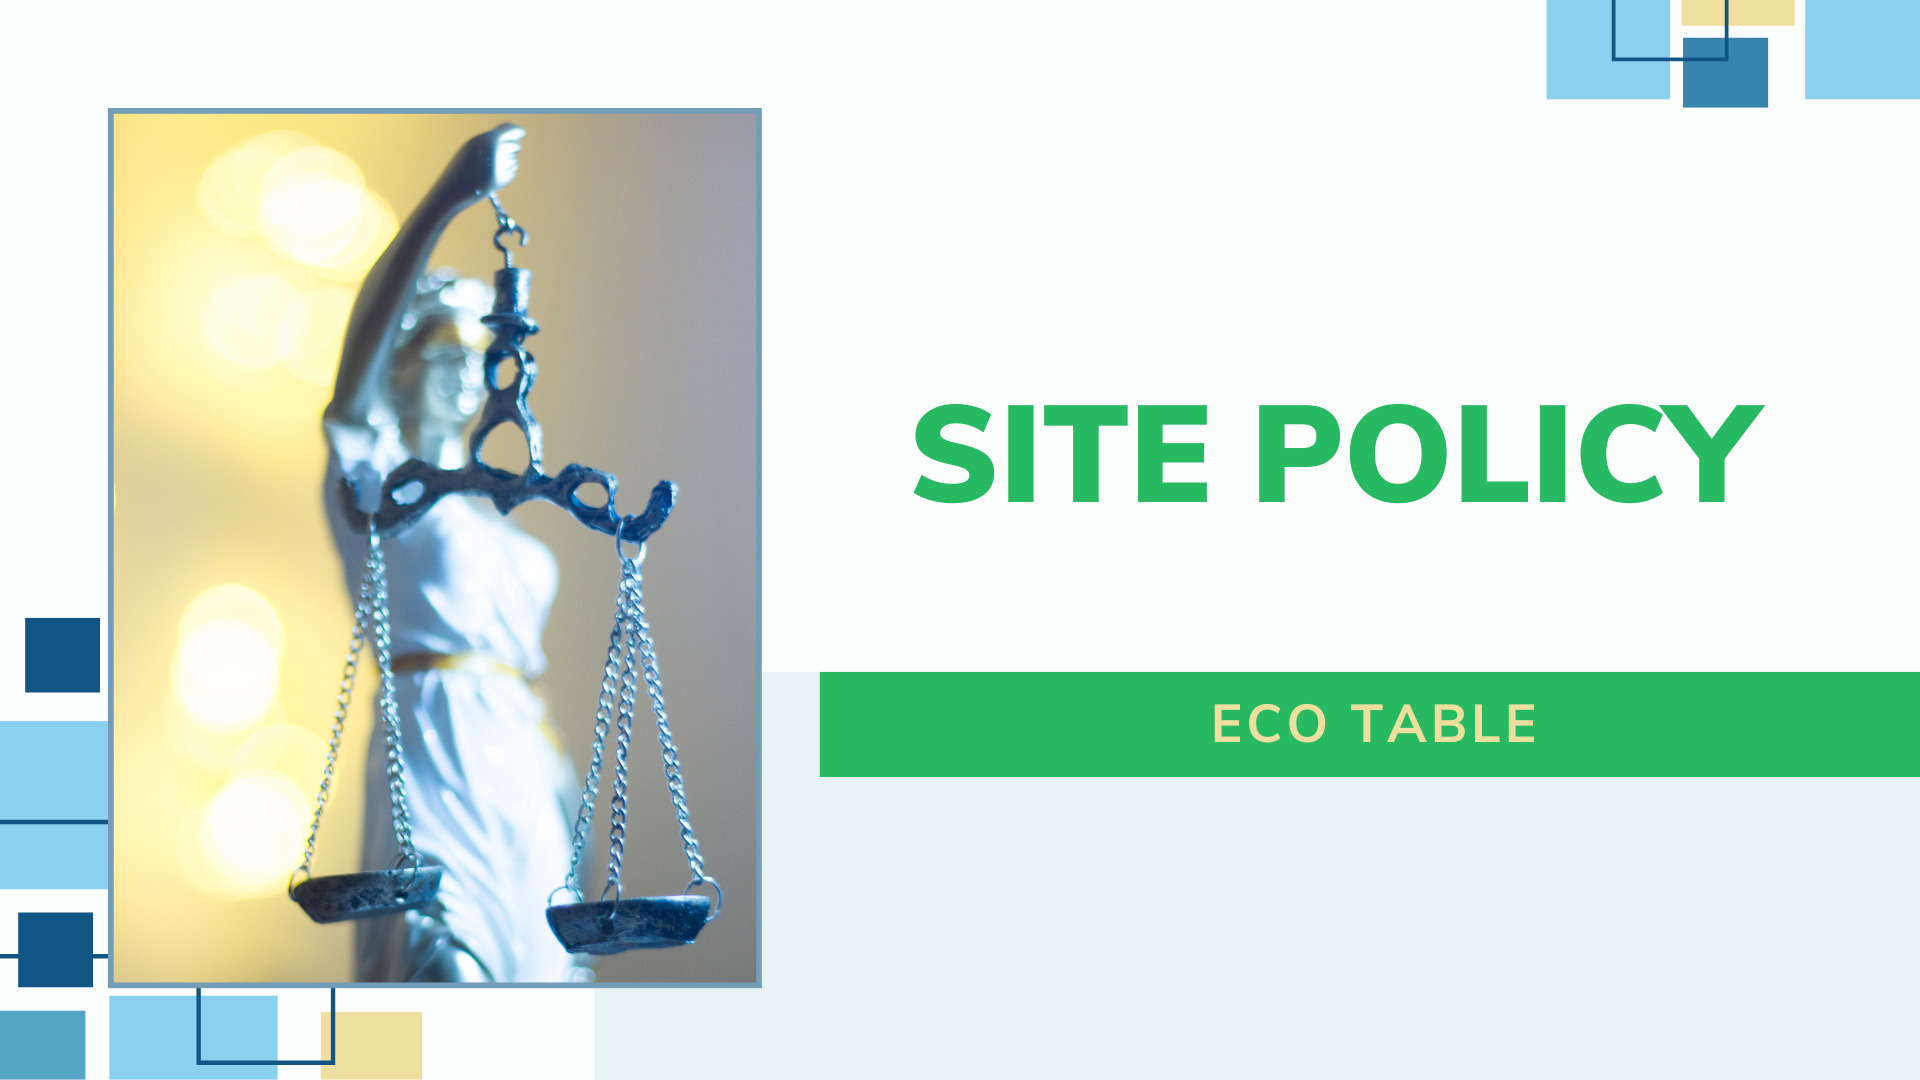 Site Policy